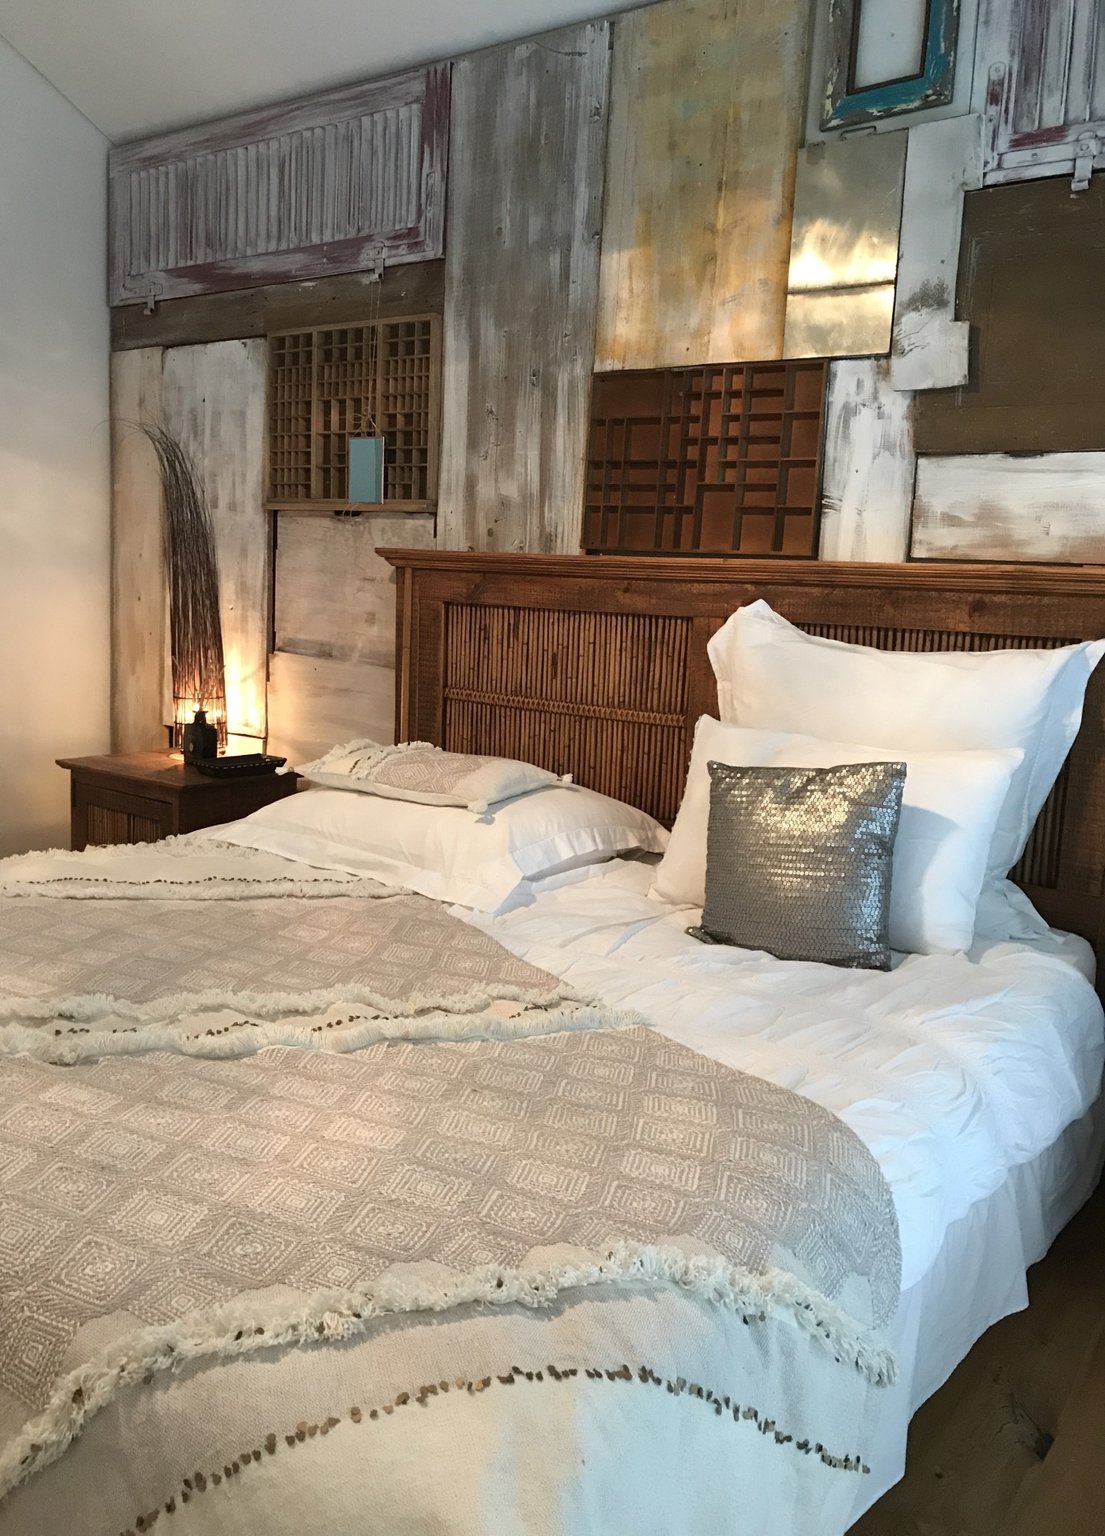 Get inspired by these modern rustic bedroom ideas and create a cozy and stylish retreat in your own home. Create the perfect blend of contemporary and rustic!